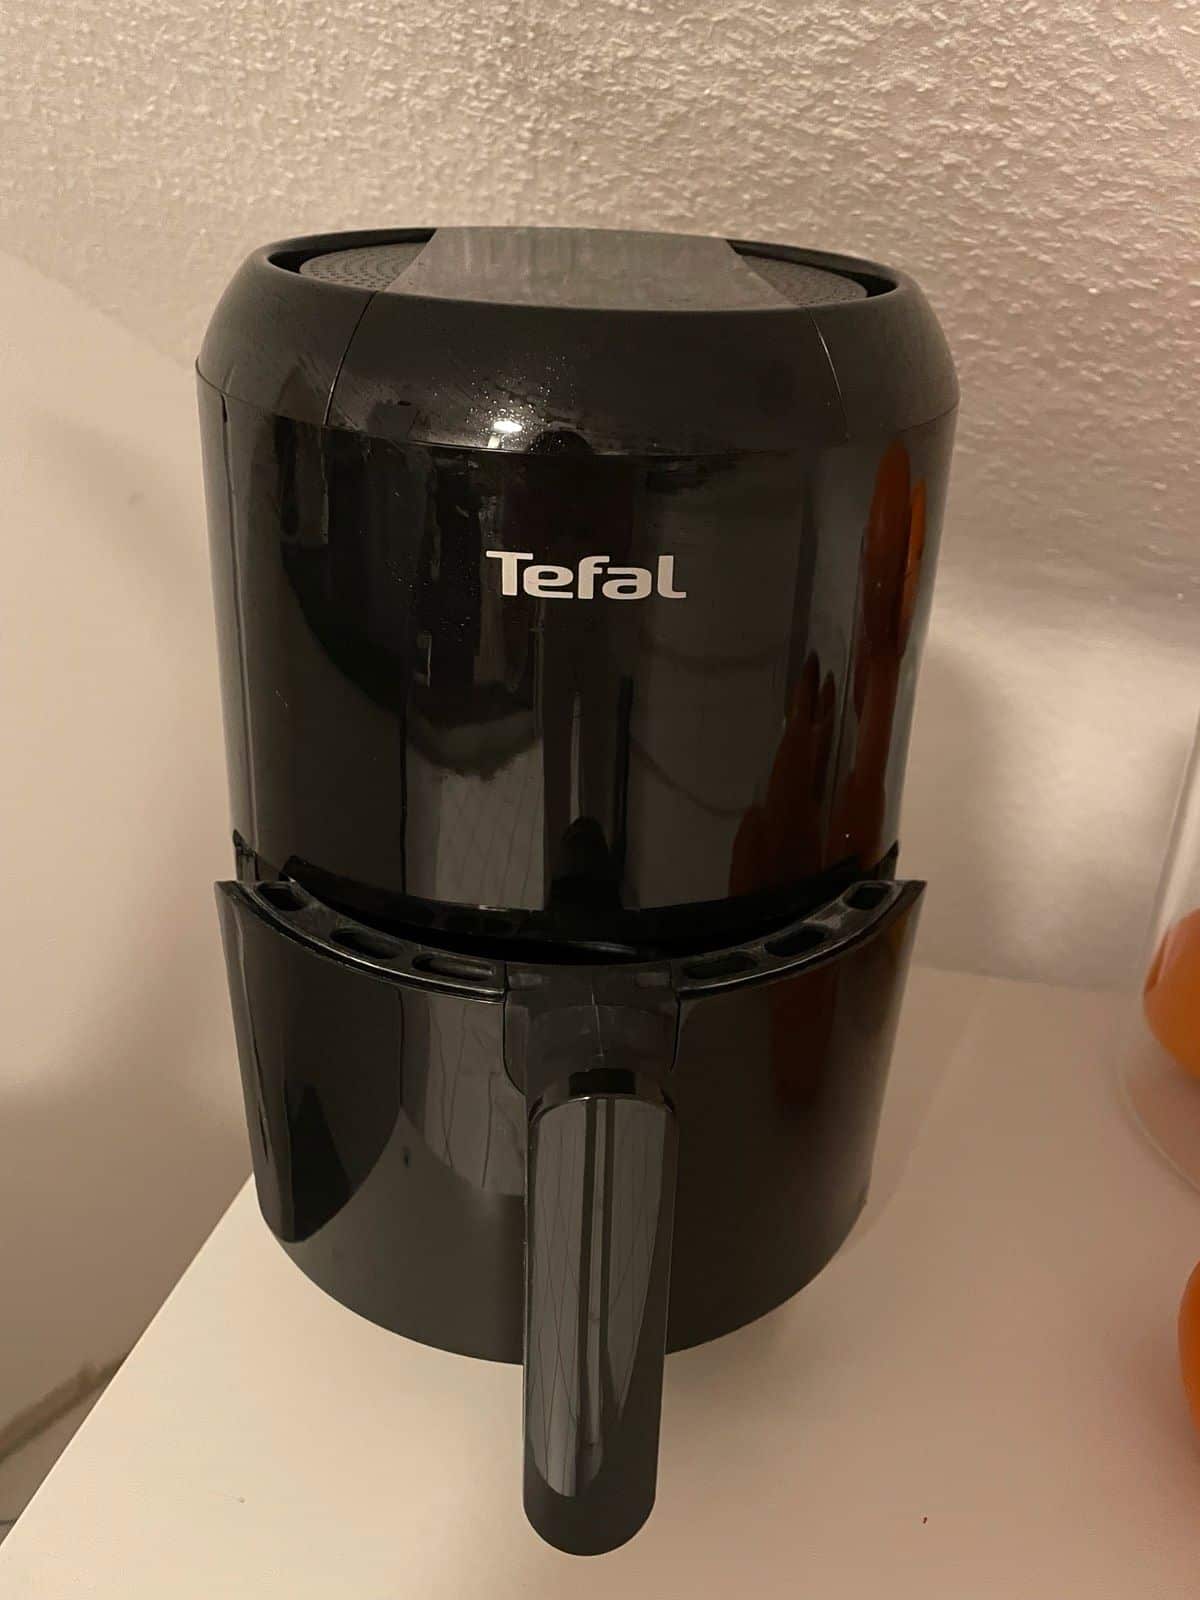 TEFAL Heißluftfritteuse Easy Fry Compact »EY3018«